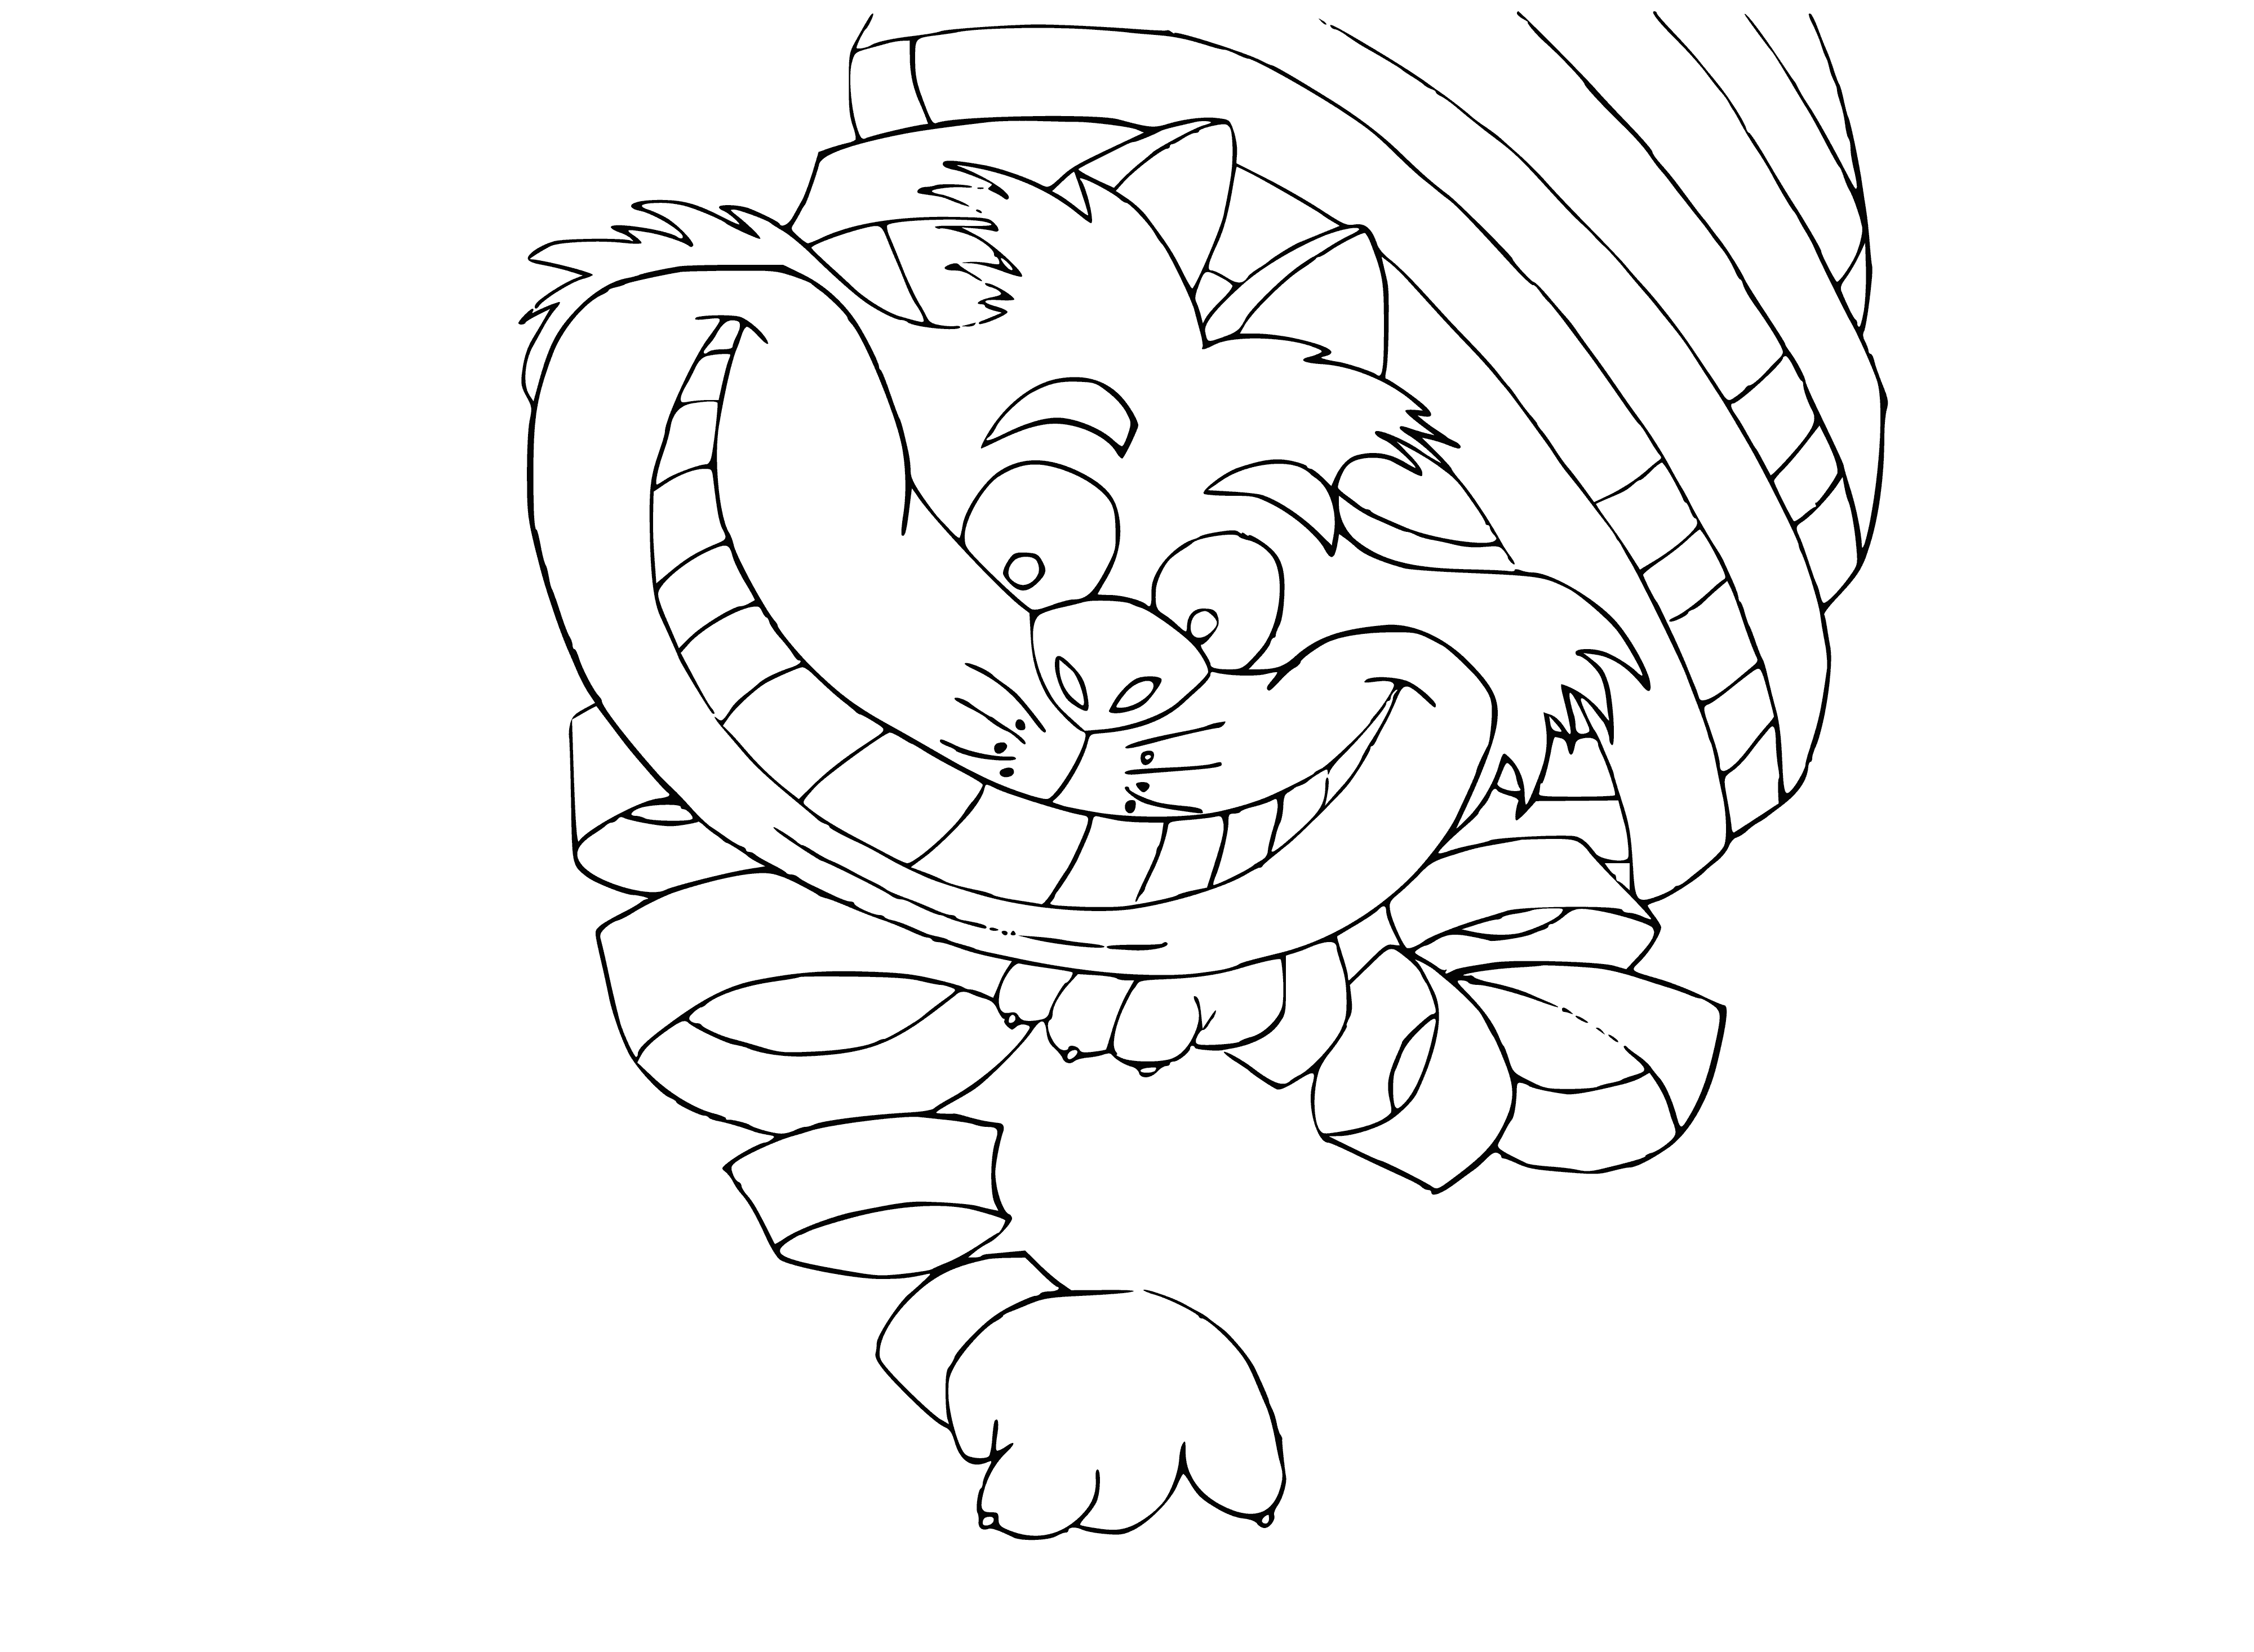 coloring page: Cheshire Cat has a toothy grin & faded, transparent body w/ large eyes that seem to follow you around the room.